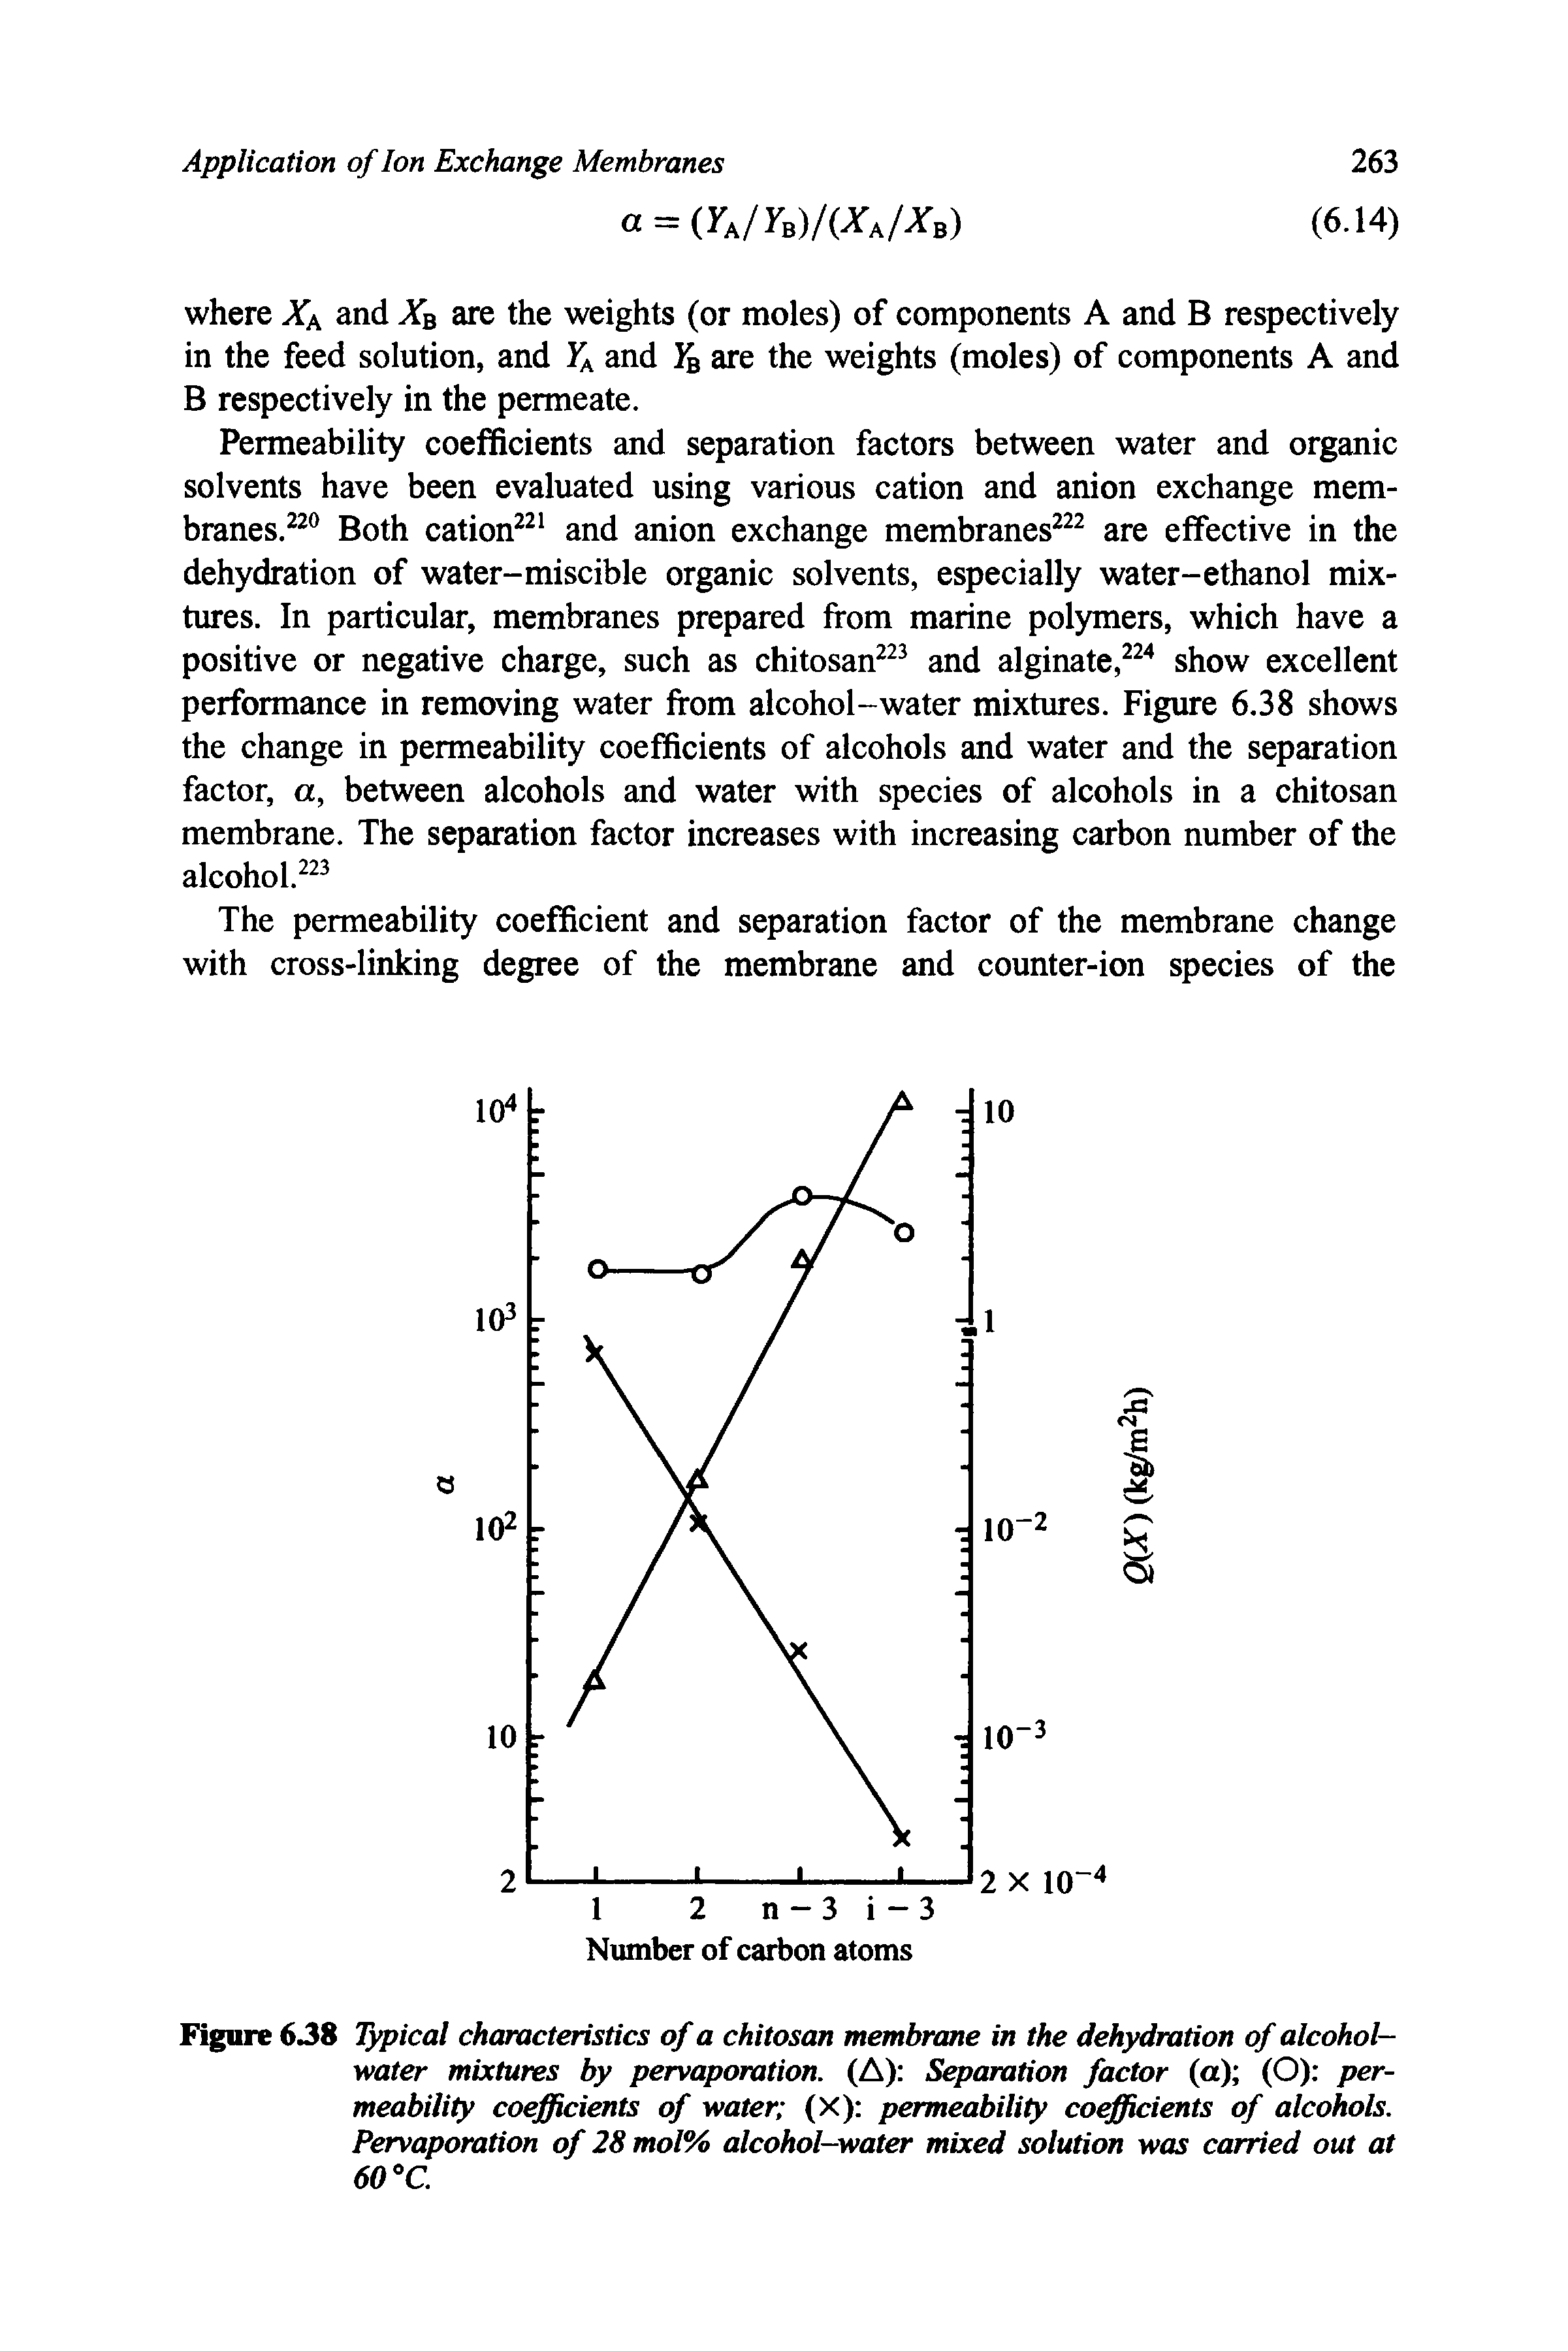 Figure 6.38 Typical characteristics of a chitosan membrane in the dehydration of alcohol-water mixtures by pervaporation. (A) Separation factor (a) (O) permeability coefficients of water (X) permeability coefficients of alcohols. Pervaporation of 28 mol% alcohol-water mixed solution was carried out at 60 °C.